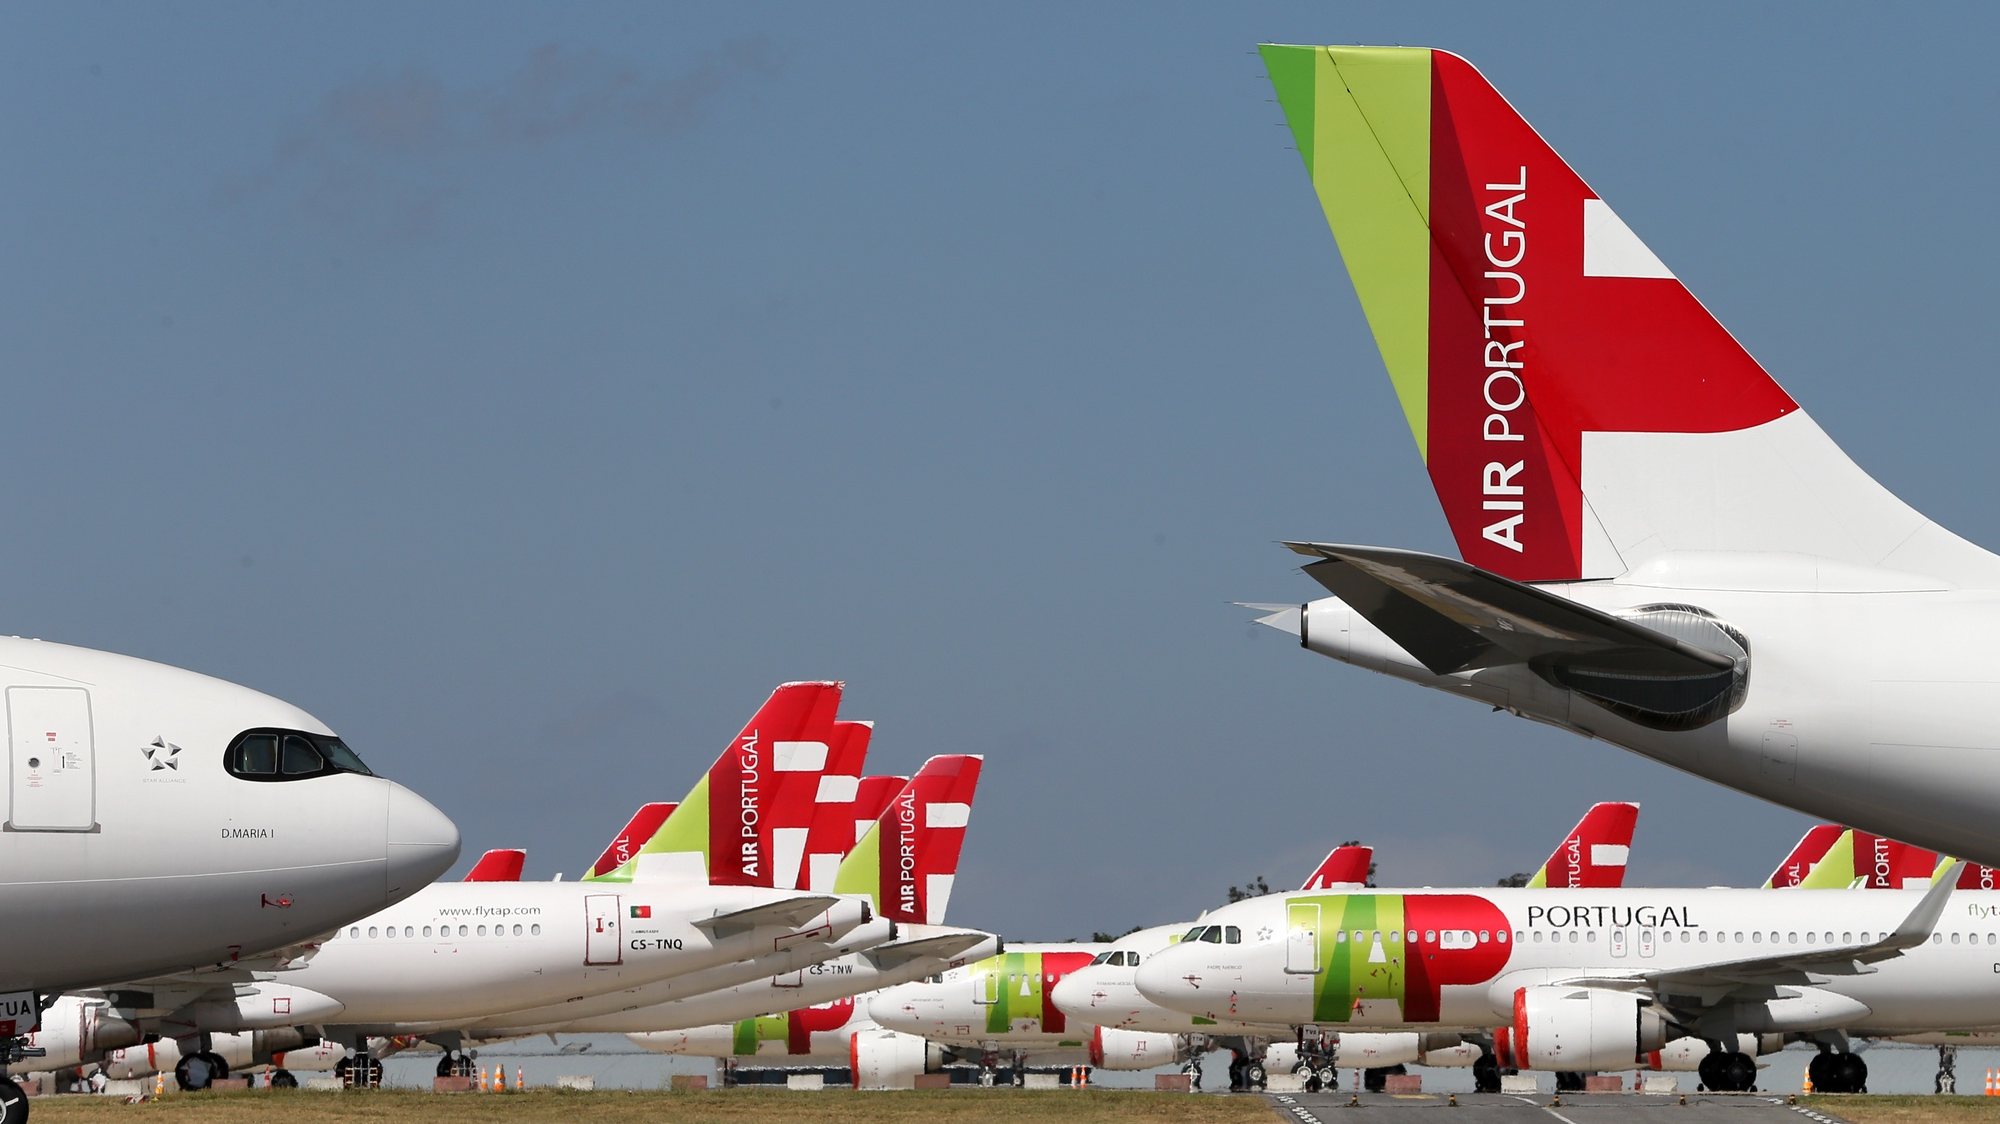 File photo dated from 09 April 2020 of TAP Air Portugal aircraft grounded at Humberto Delgado airport closed for passenger traffic as part of the exceptional traffic measures to combat the epidemiological situation of Covid-19, in Lisbon, Portugal, 09 April 2020 (reissued 02 July 2020). The granting of state support to TAP has been under discussion since the airline&#039;s activity came to a standstill because of the coronavirus pandemic, with an agreed injection of up to 1,200 million euros. MARIO CRUZ/LUSA